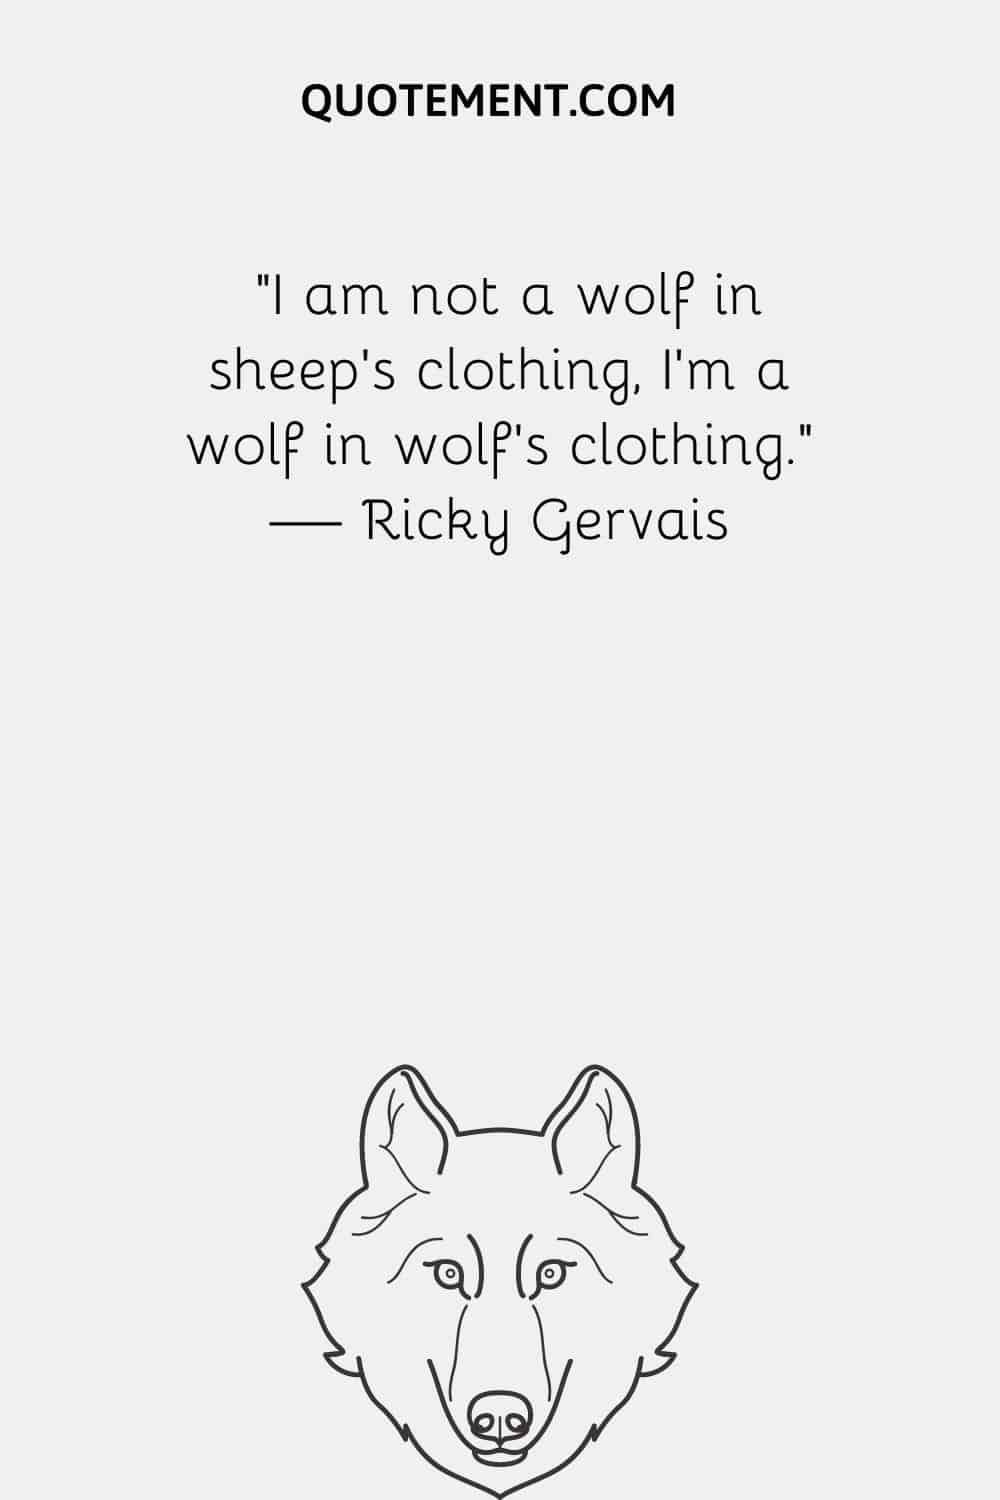 wolf head illustration representing alpha lone wolf quote